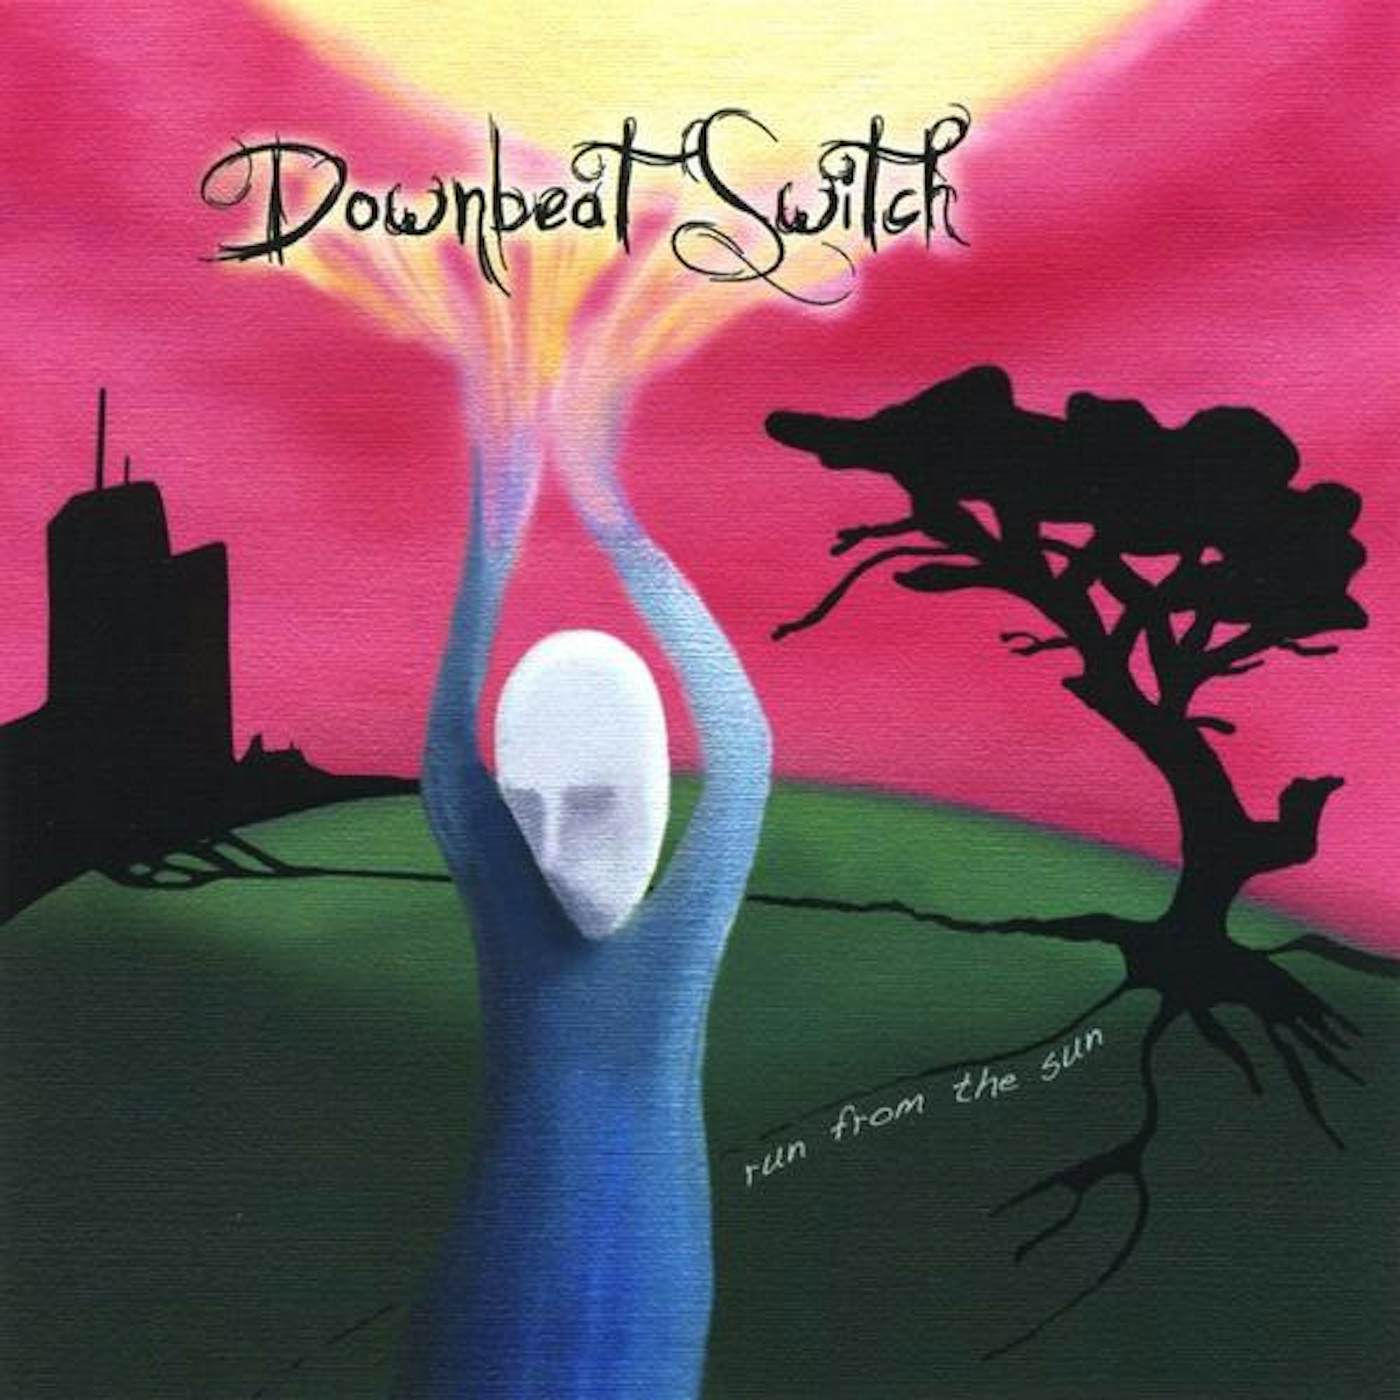 Downbeat Switch RUN FROM THE SUN CD